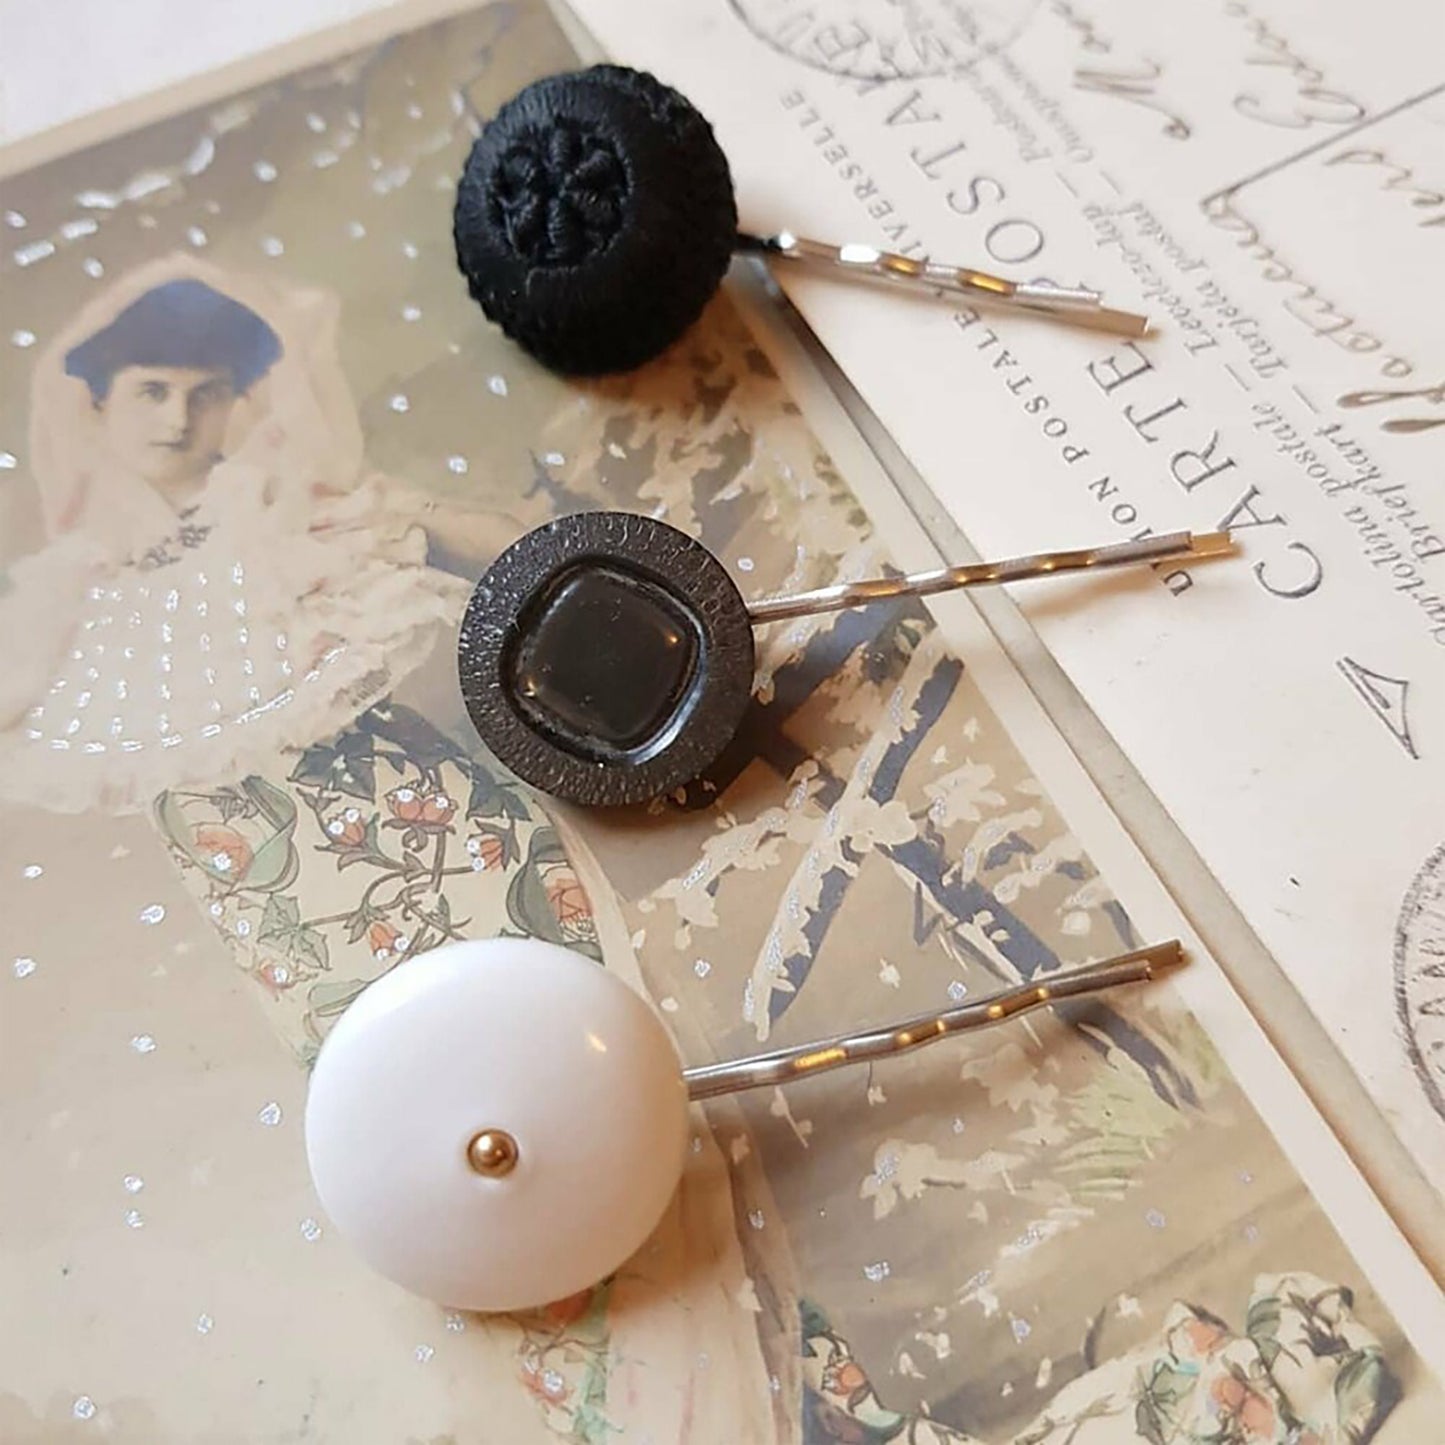 "Button Bobby Pins: A whimsical twist on traditional hair accessories, handmade from retro buttons for a unique look."